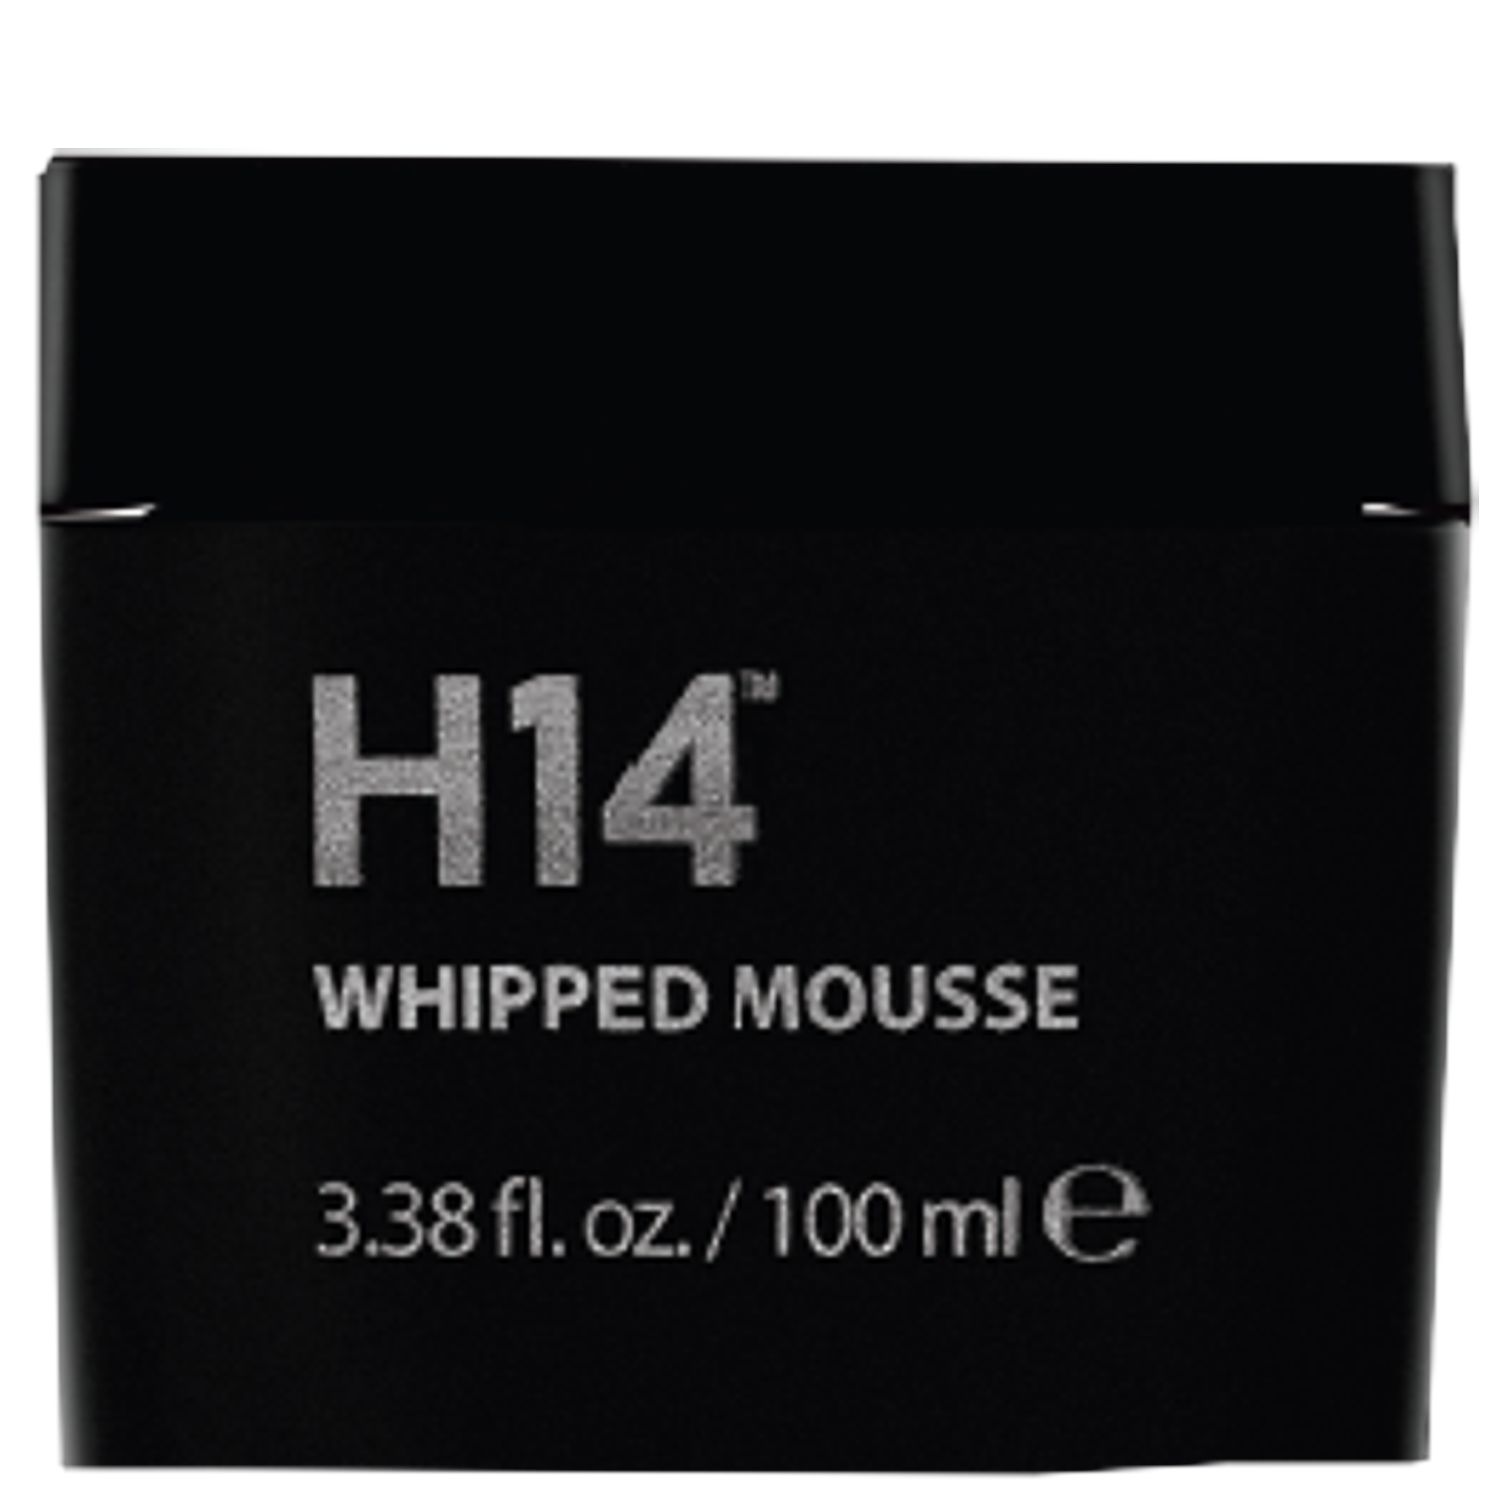 H14 Whipped Mousse 100 ml